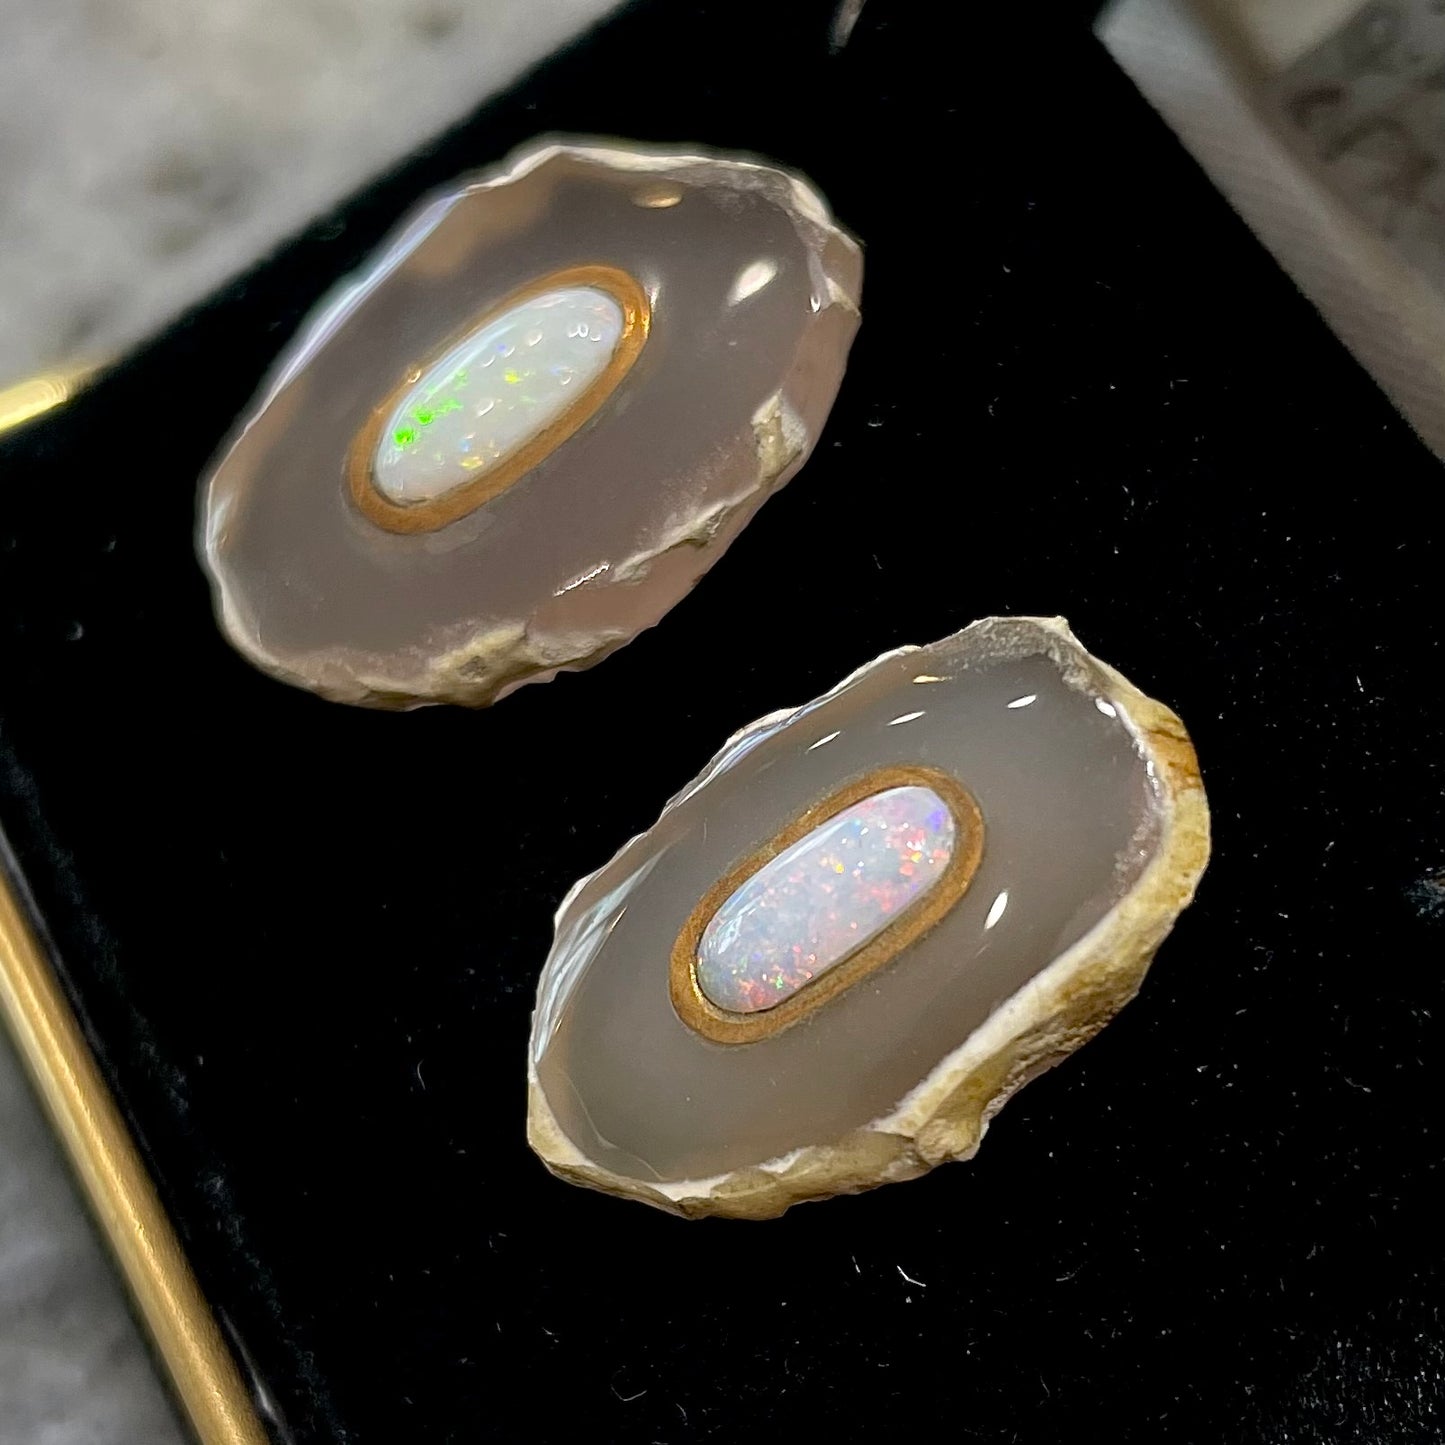 Earrings featuring oval cut white crystal opal cabochons set in slices of polished agate with yellow gold bezels.